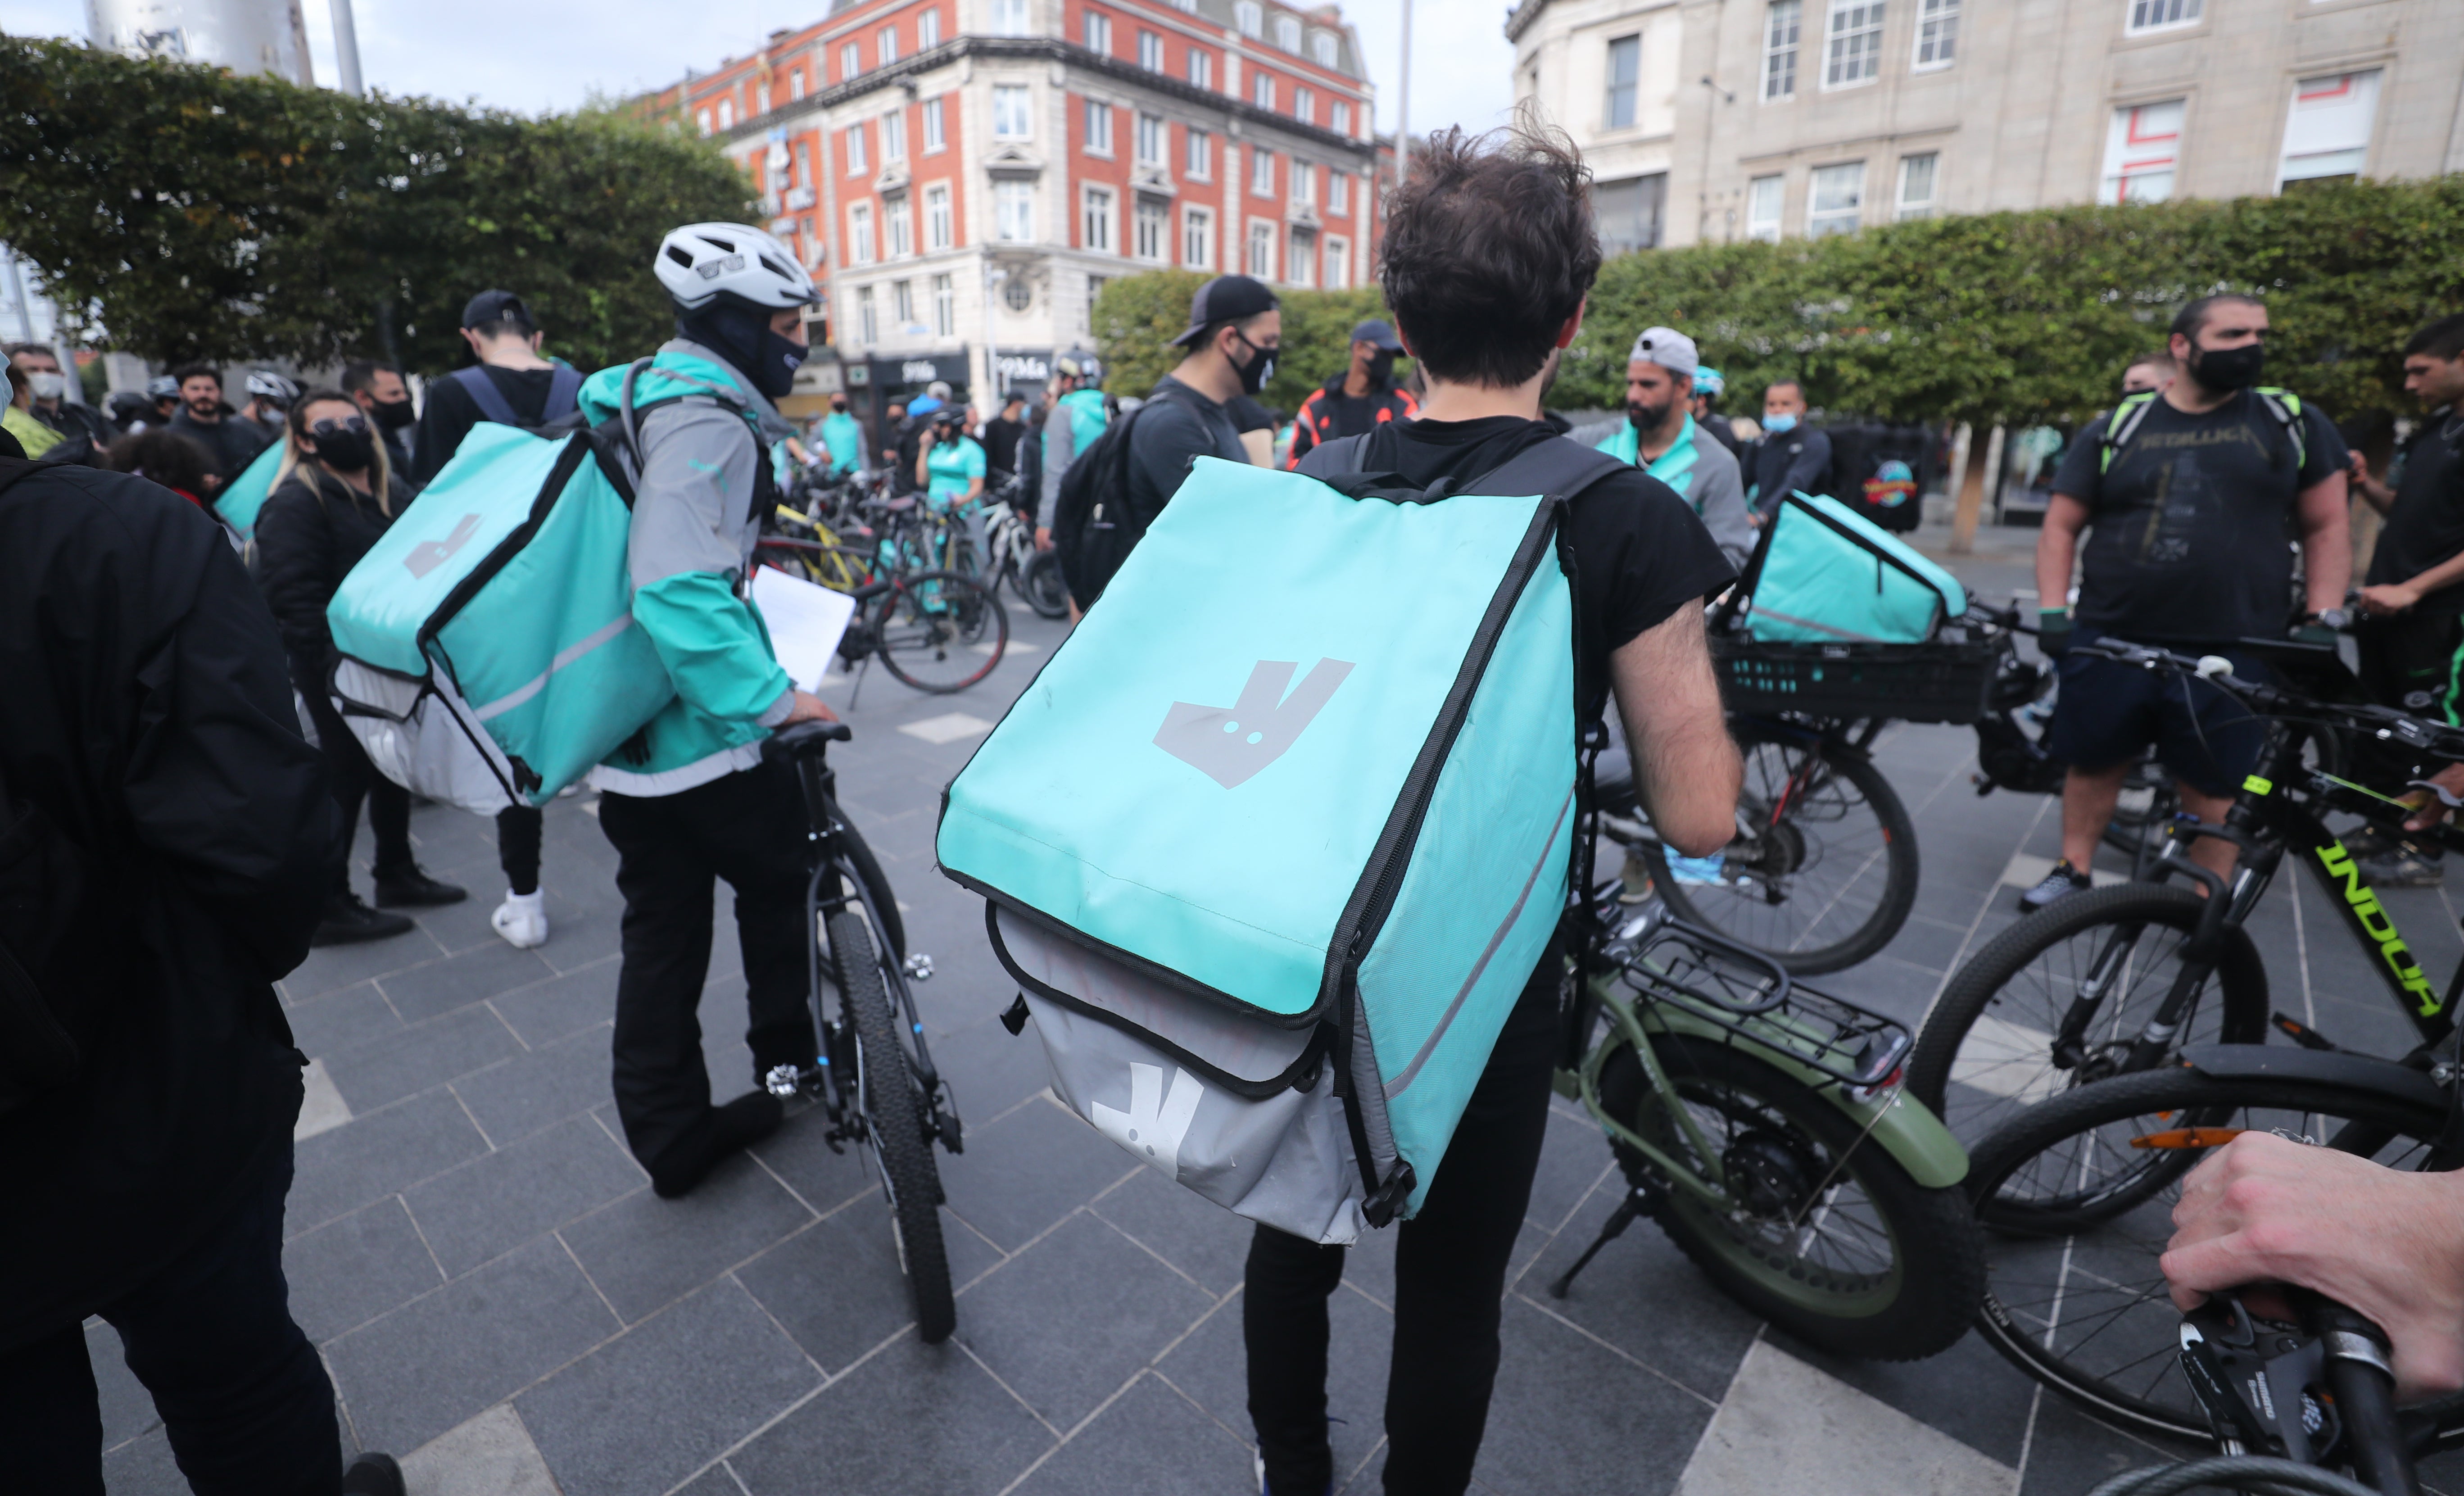 It is the latest incident to increase tension between Deliveroo and many of its riders